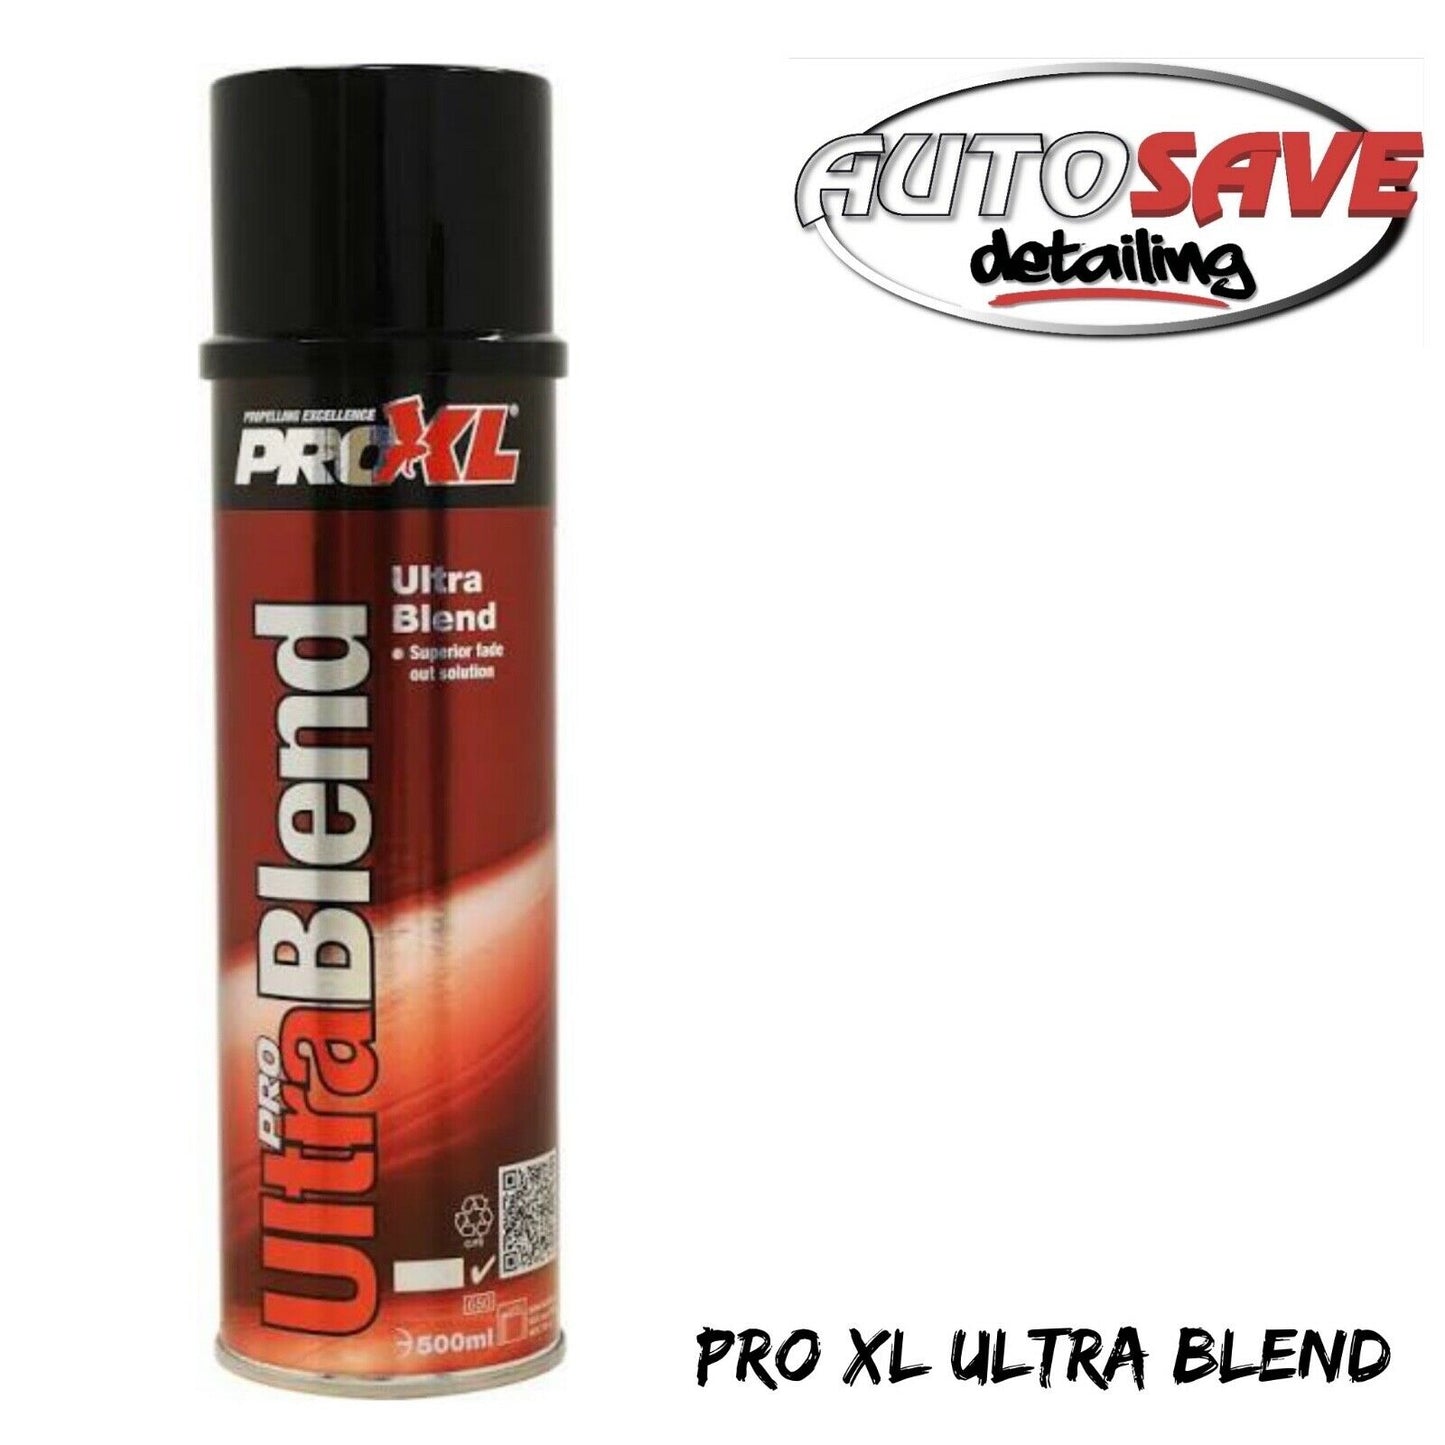 PRO XL ULTRA BLEND OUT SOLUTION FADE OUT THINNERS AEROSOL RATTLE CAN